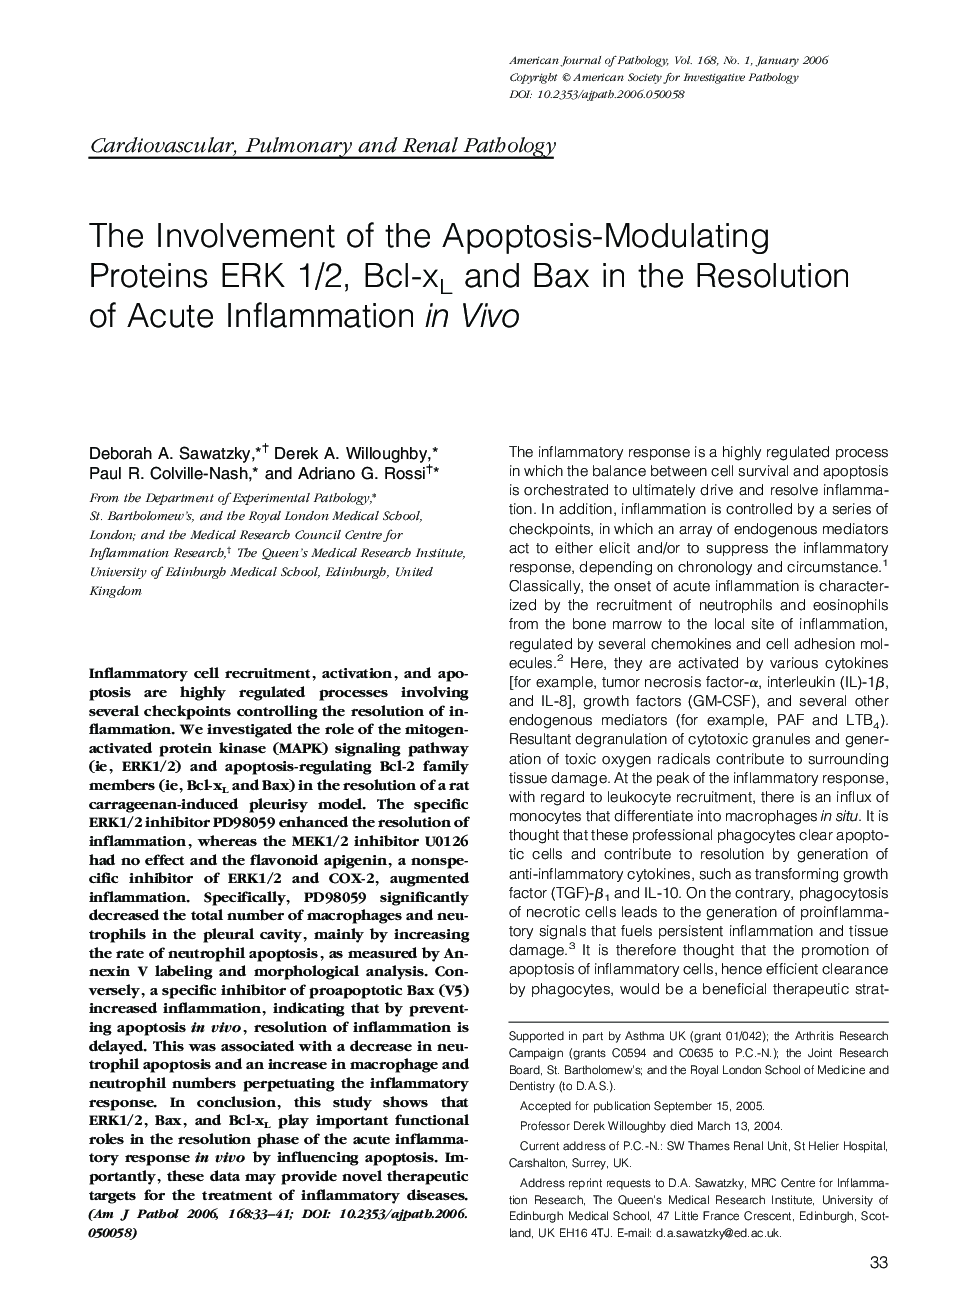 The Involvement of the Apoptosis-Modulating Proteins ERK 1/2, Bcl-xL and Bax in the Resolution of Acute Inflammation in Vivo